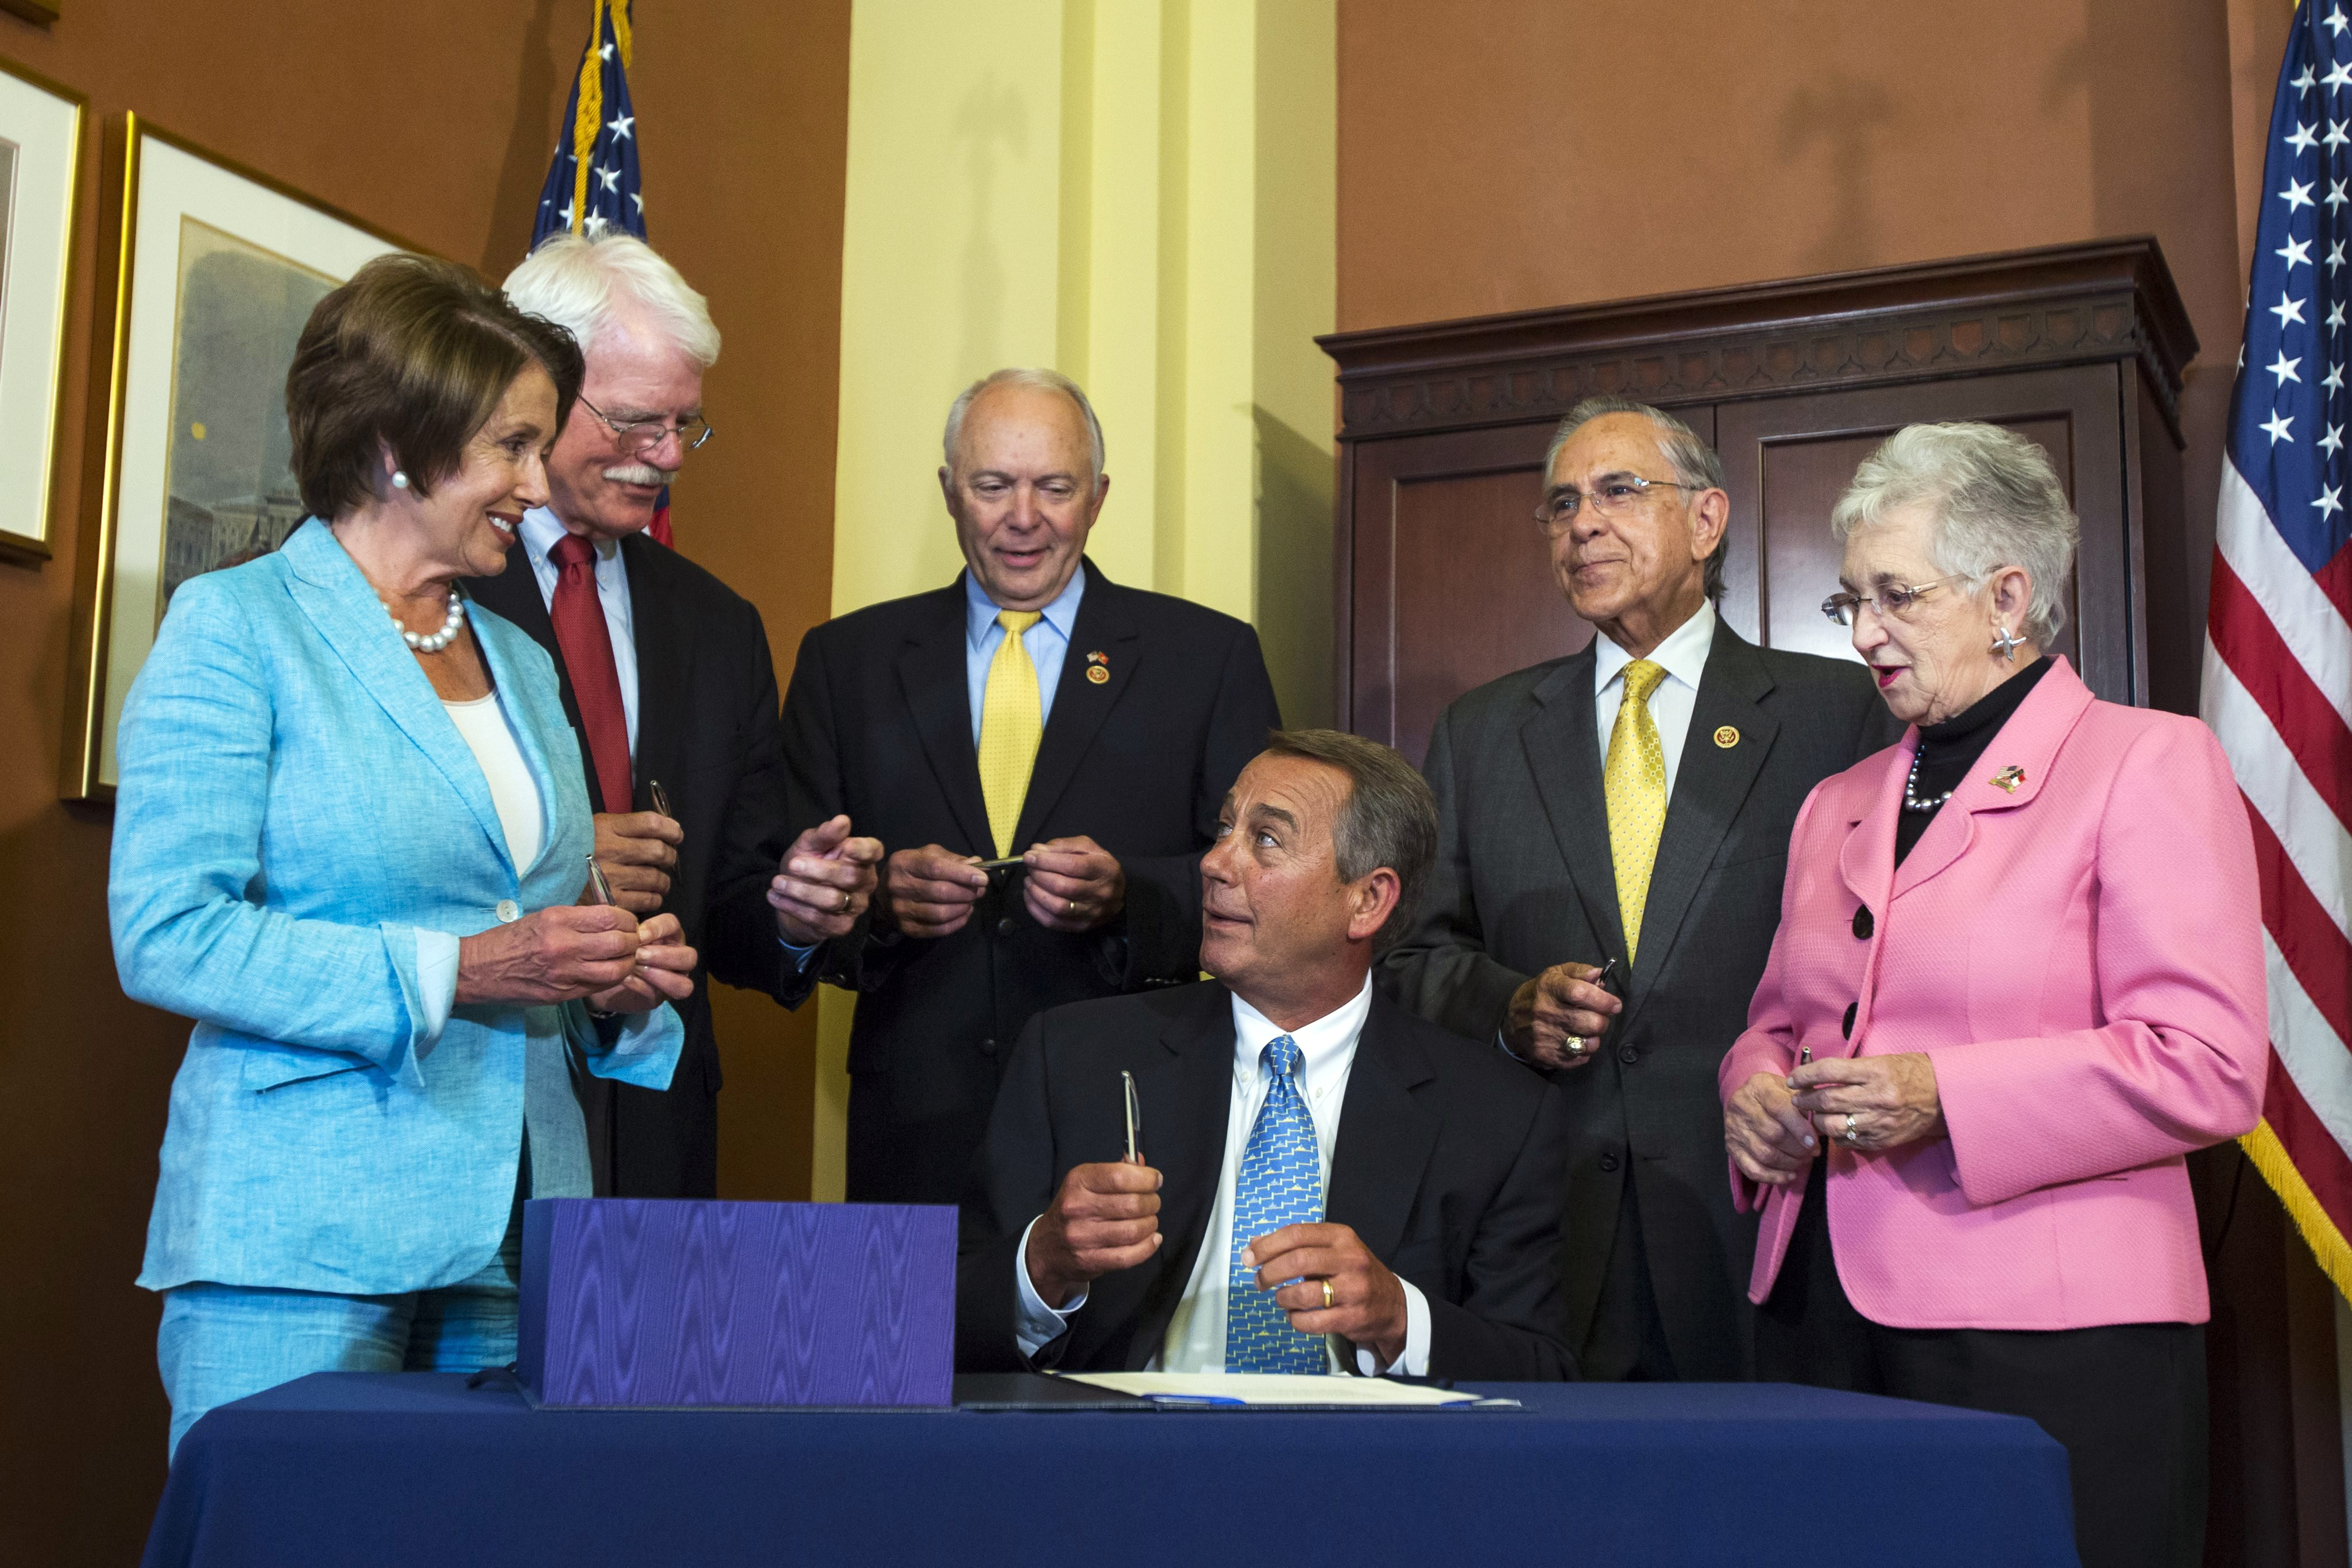 Republican Speaker of the House John Boehner (C) reacts after signing the Workforce Innovation and Opportunity Act with (from left to right) Democratic House Minority Leader Nancy Pelosi, Democratic Congressman George Miller, Republican Congressman John Kline, Republican Congresswoman Virginia Foxx, and Democratic Congressman Ruben Hinojosa in the Speaker's Conference Room in the US Capitol in Washington on July 11, 2014.